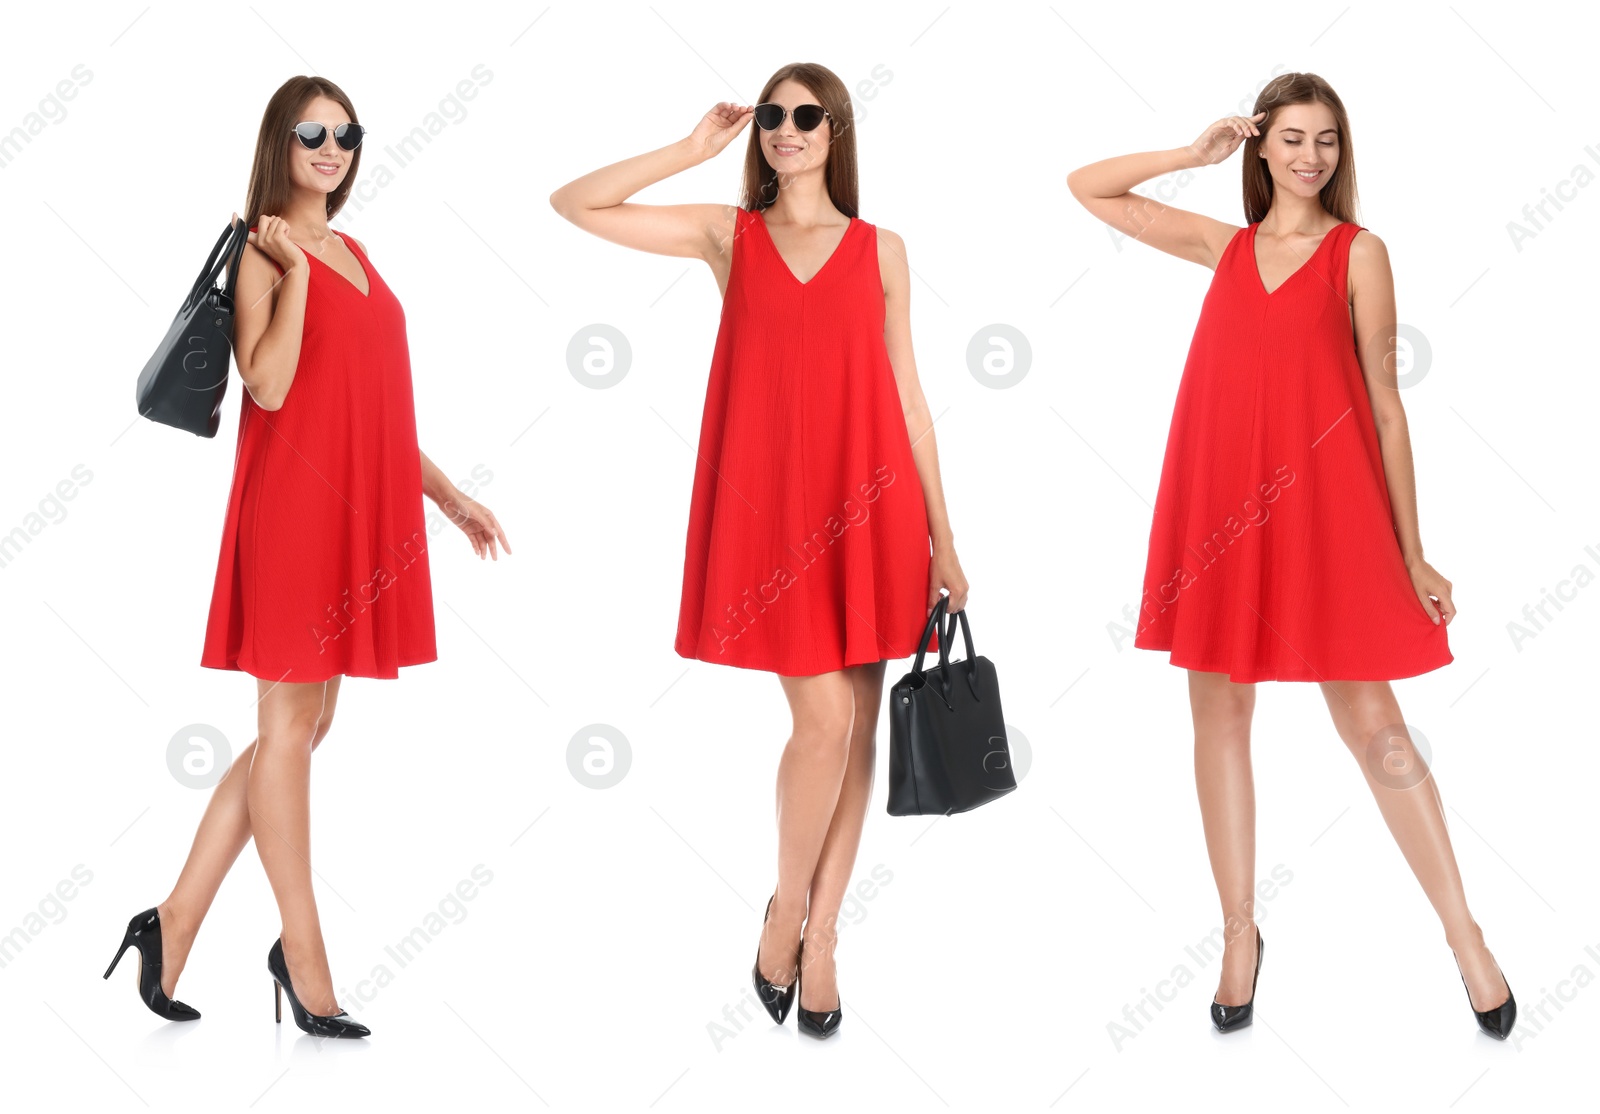 Image of Collage with photos of woman wearing dress on white background